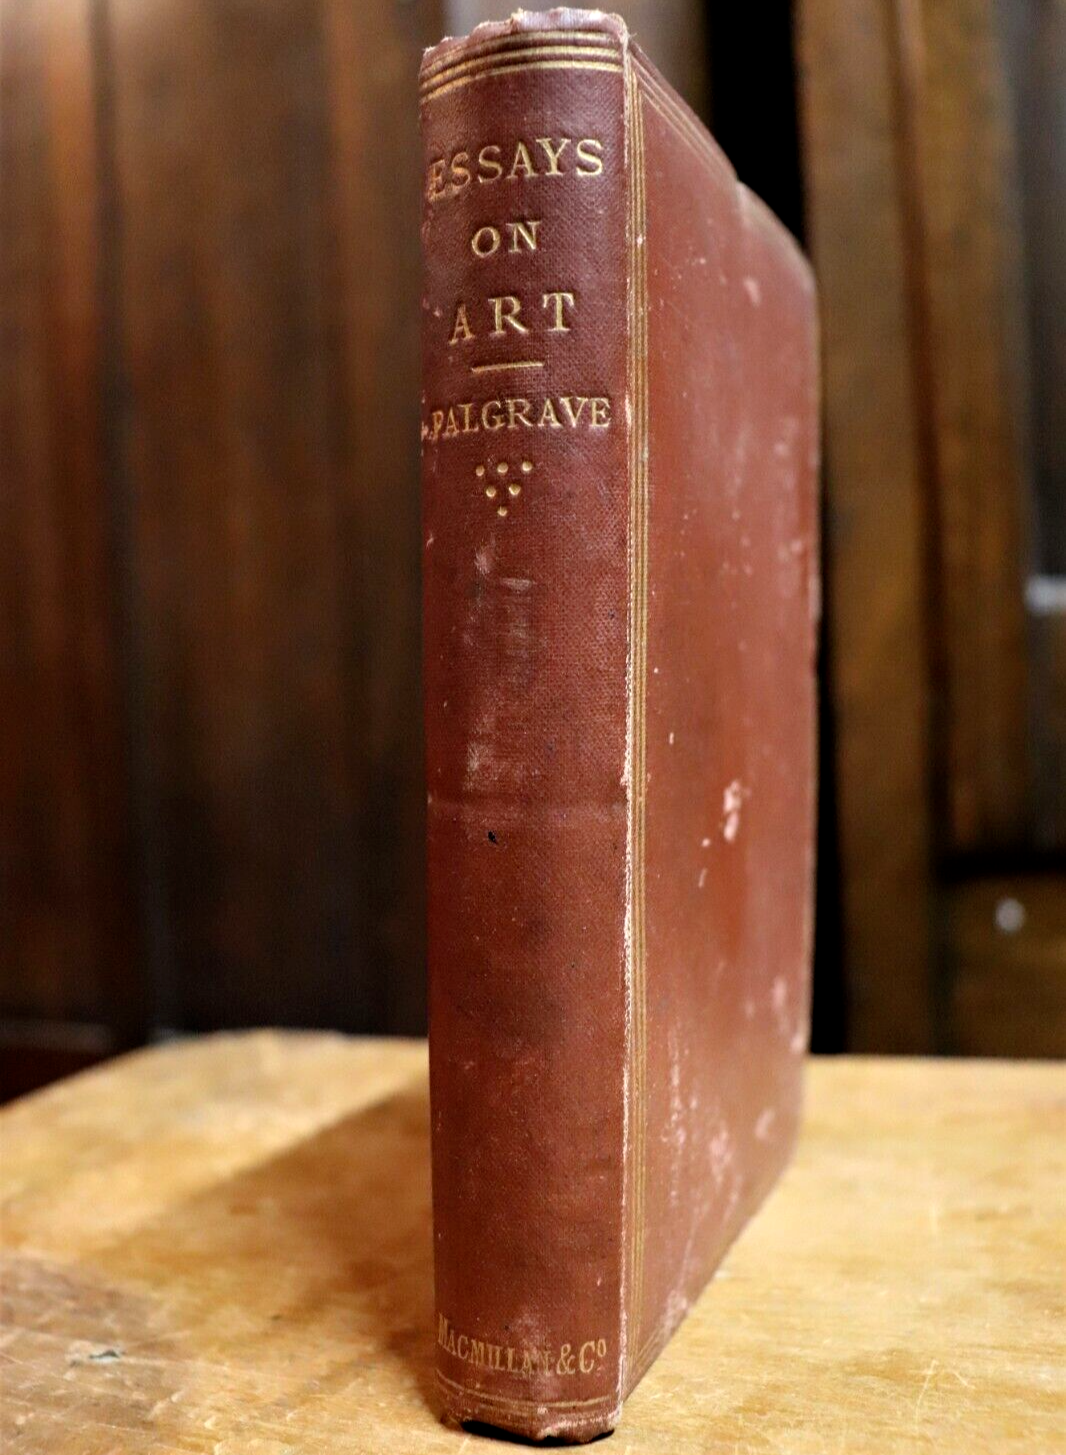 1866 Essays On Art by Francis Turner Palgrave Antiquarian Art Book